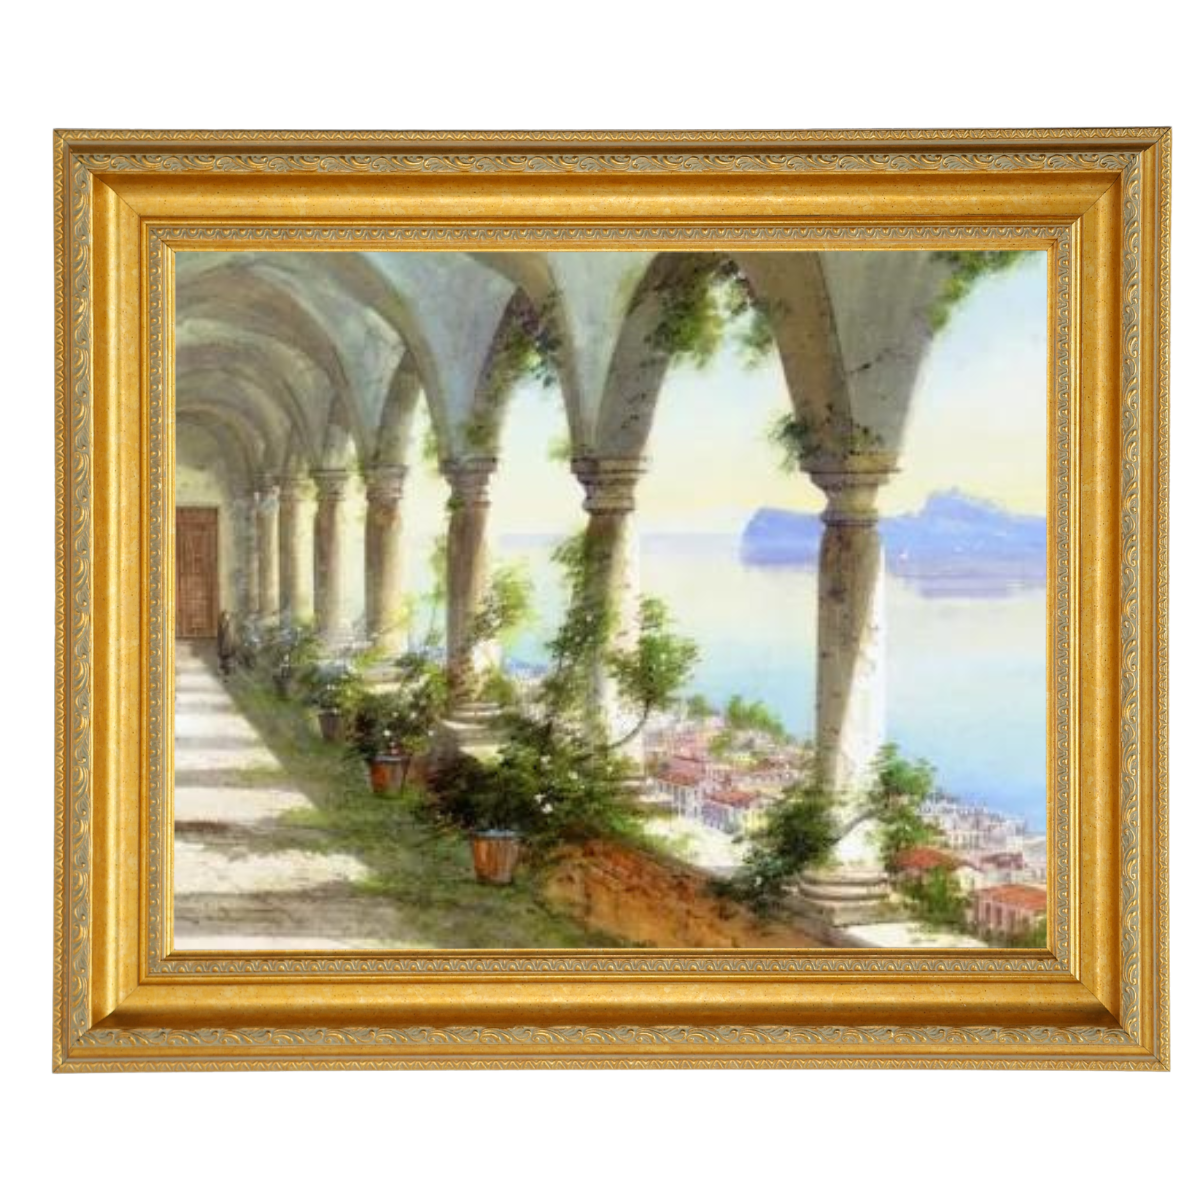 A Colonnade Overlooking the Isle of Capri - Vintage Wall Art Prints Framed  For Living Room